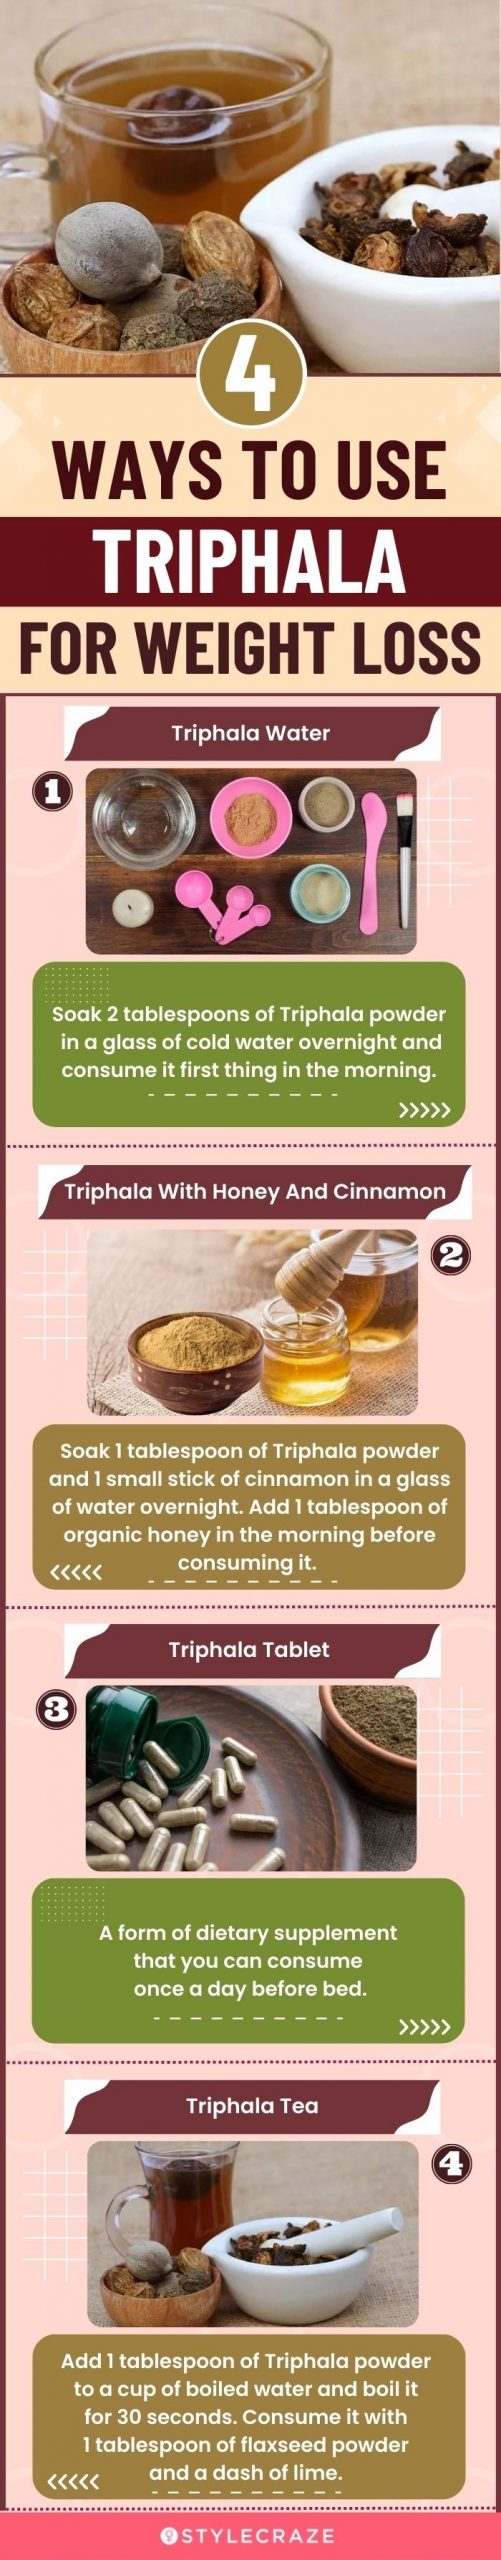 4 ways to use triphala for weight loss (infographic)